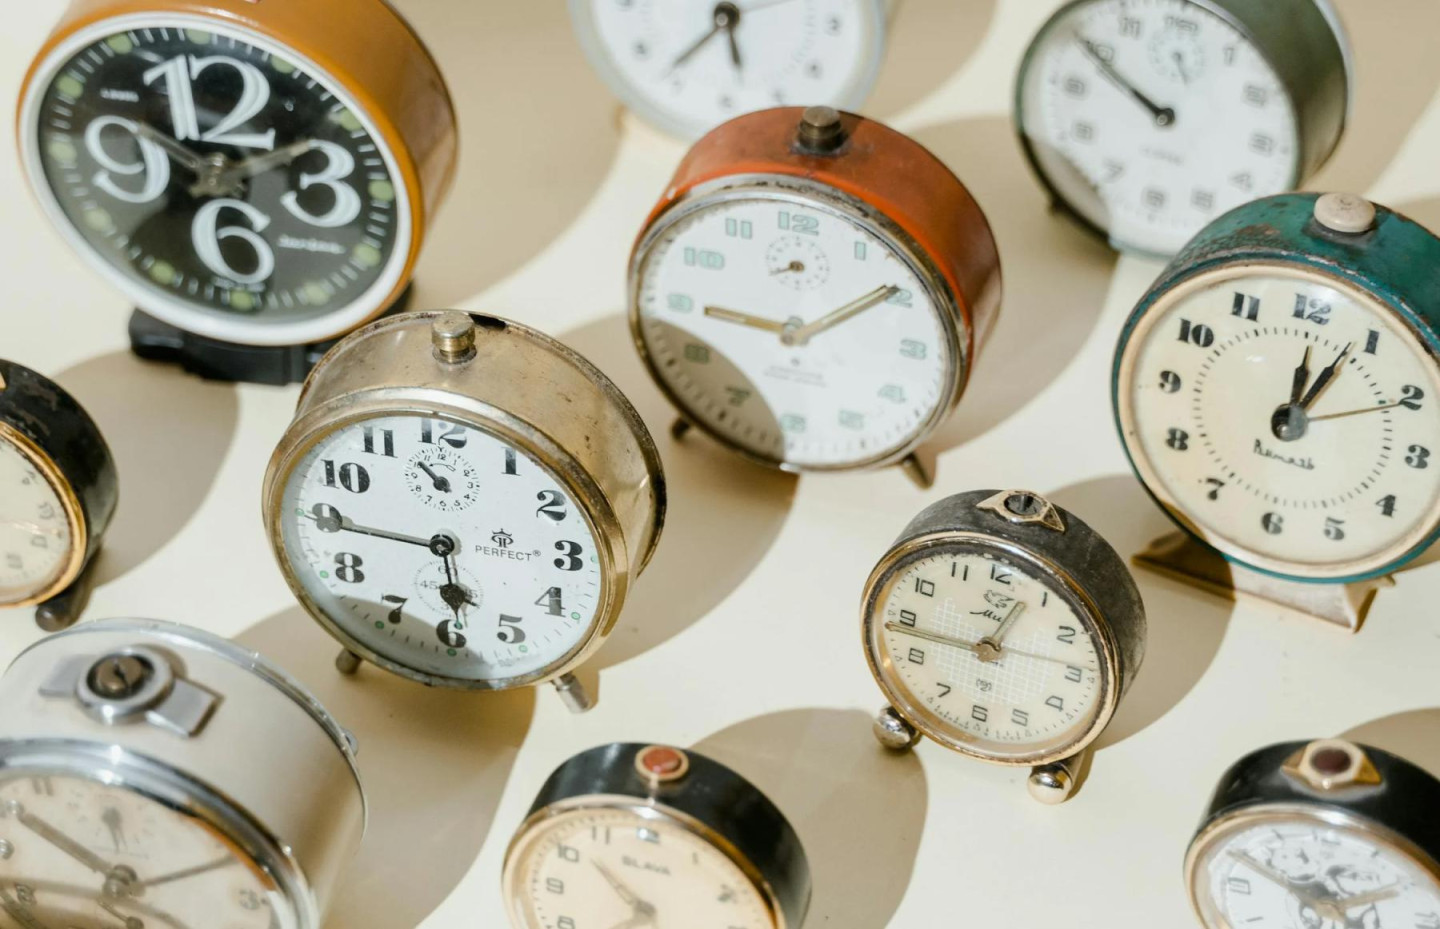 “Get up, get up”: how humanity invented alarm clocks and what came of it